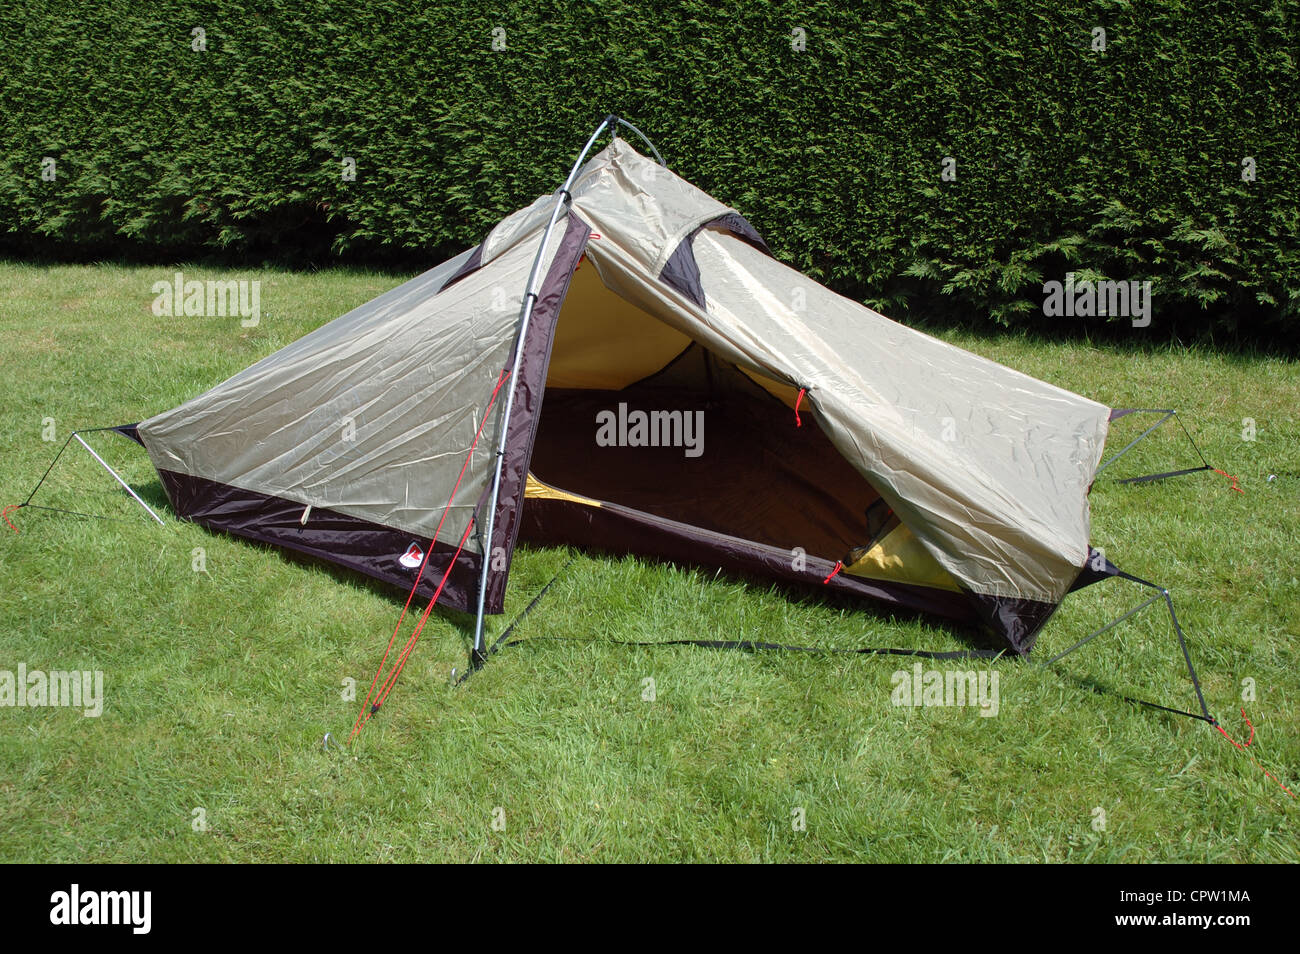 Robens Star 2 lightweight backpacking tent Stock Photo